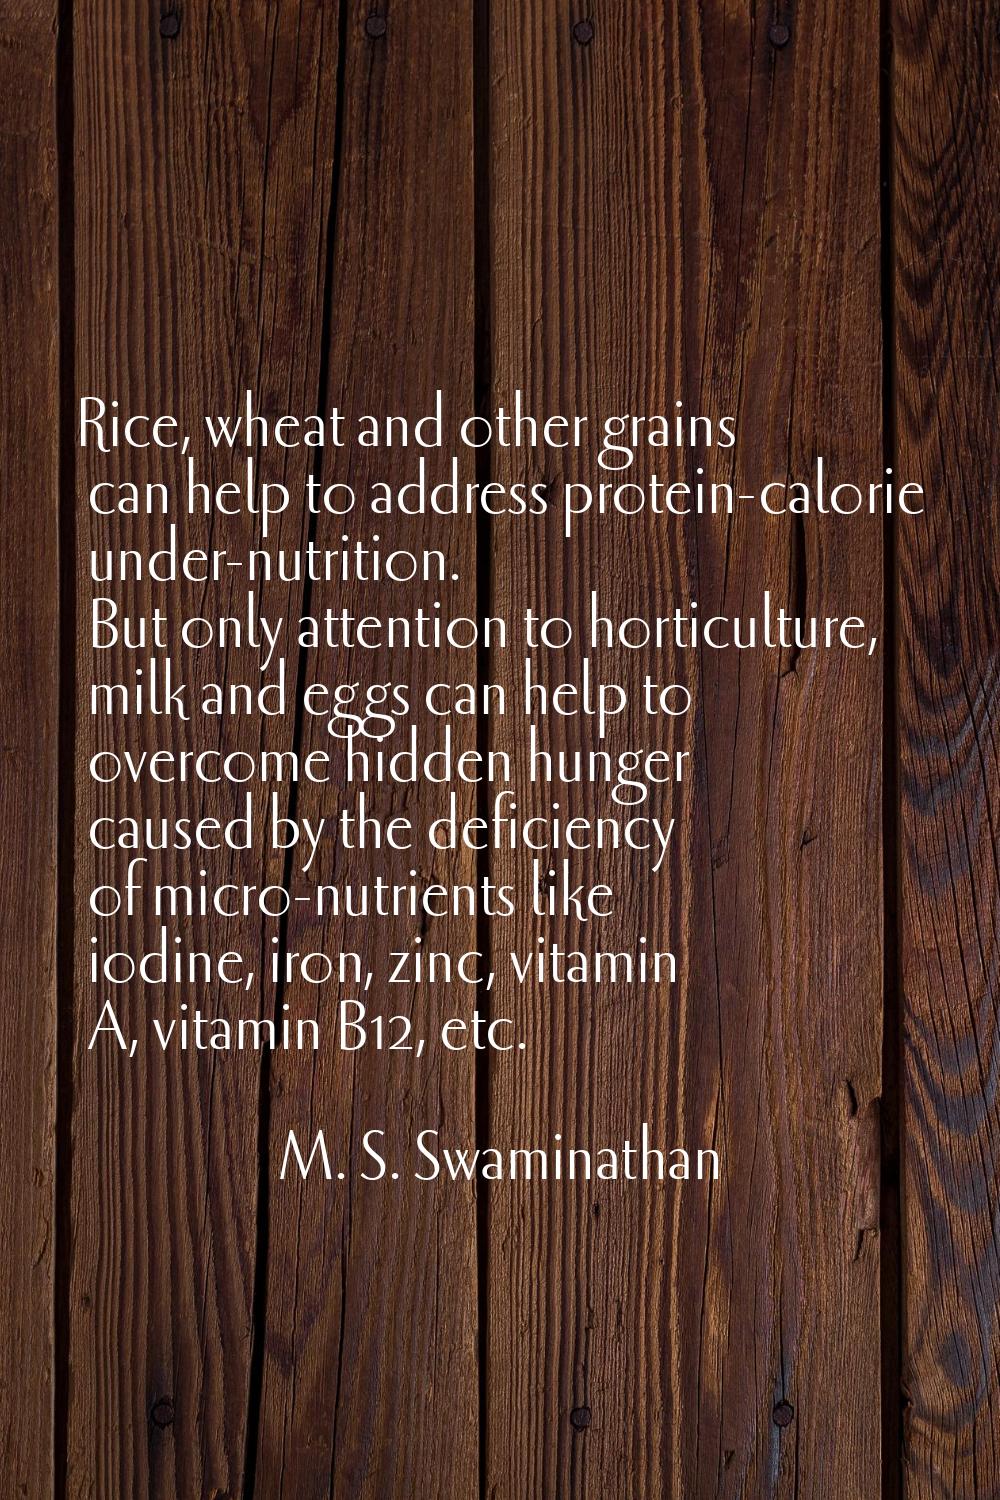 Rice, wheat and other grains can help to address protein-calorie under-nutrition. But only attentio